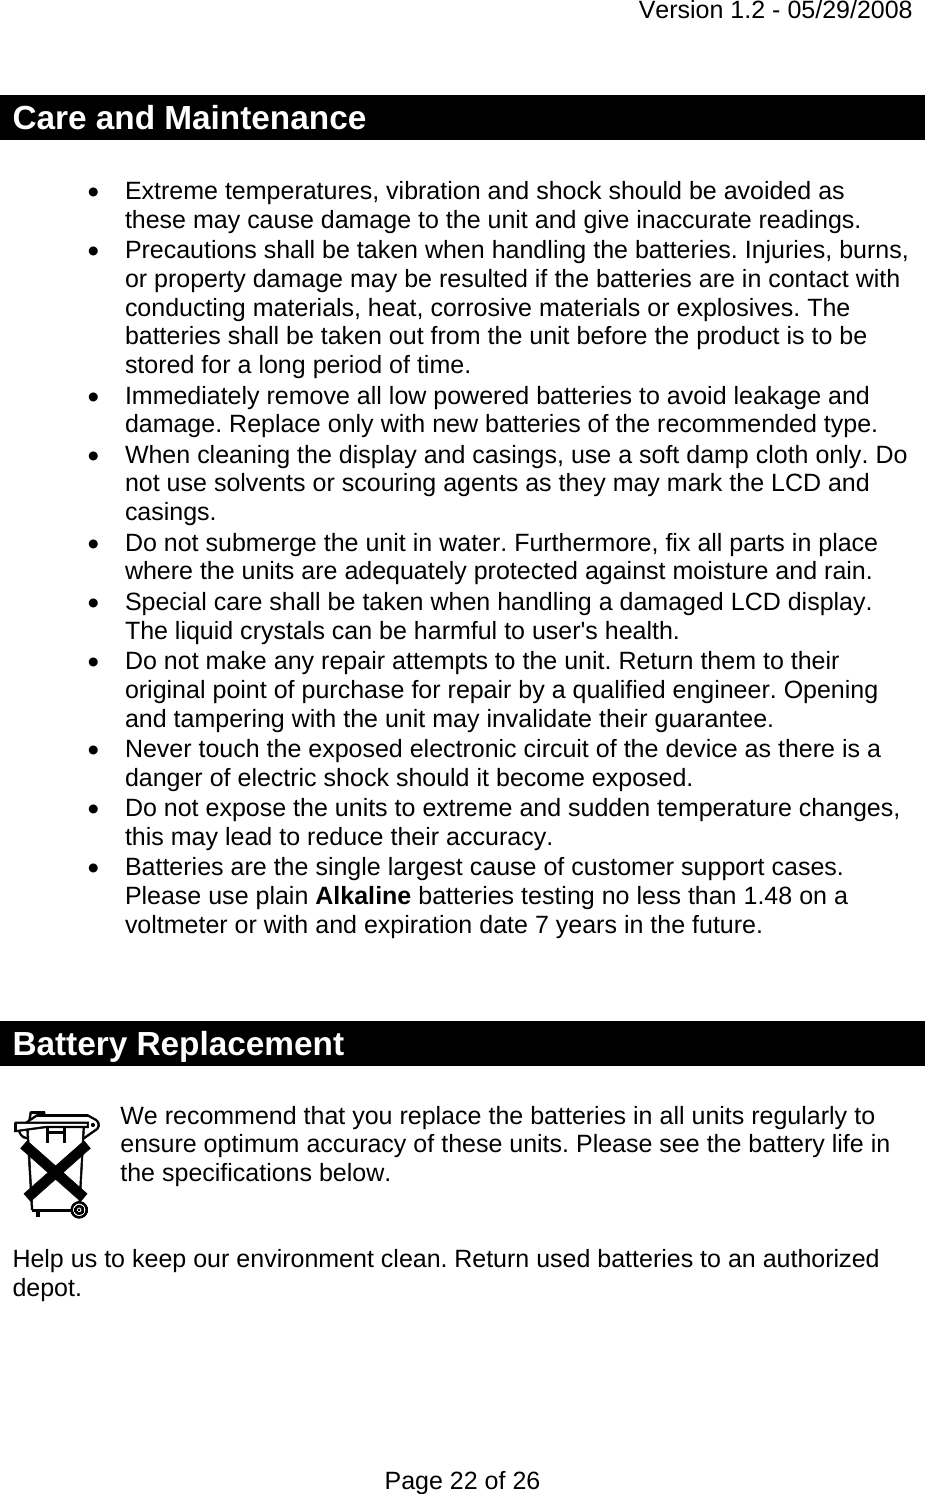 Version 1.2 - 05/29/2008 Page 22 of 26 Care and Maintenance  •  Extreme temperatures, vibration and shock should be avoided as these may cause damage to the unit and give inaccurate readings. •  Precautions shall be taken when handling the batteries. Injuries, burns, or property damage may be resulted if the batteries are in contact with conducting materials, heat, corrosive materials or explosives. The batteries shall be taken out from the unit before the product is to be stored for a long period of time. •  Immediately remove all low powered batteries to avoid leakage and damage. Replace only with new batteries of the recommended type. •  When cleaning the display and casings, use a soft damp cloth only. Do not use solvents or scouring agents as they may mark the LCD and casings. •  Do not submerge the unit in water. Furthermore, fix all parts in place where the units are adequately protected against moisture and rain. •  Special care shall be taken when handling a damaged LCD display. The liquid crystals can be harmful to user&apos;s health. •  Do not make any repair attempts to the unit. Return them to their original point of purchase for repair by a qualified engineer. Opening and tampering with the unit may invalidate their guarantee. •  Never touch the exposed electronic circuit of the device as there is a danger of electric shock should it become exposed. •  Do not expose the units to extreme and sudden temperature changes, this may lead to reduce their accuracy. •  Batteries are the single largest cause of customer support cases. Please use plain Alkaline batteries testing no less than 1.48 on a voltmeter or with and expiration date 7 years in the future.   Battery Replacement  We recommend that you replace the batteries in all units regularly to ensure optimum accuracy of these units. Please see the battery life in the specifications below.   Help us to keep our environment clean. Return used batteries to an authorized depot.   